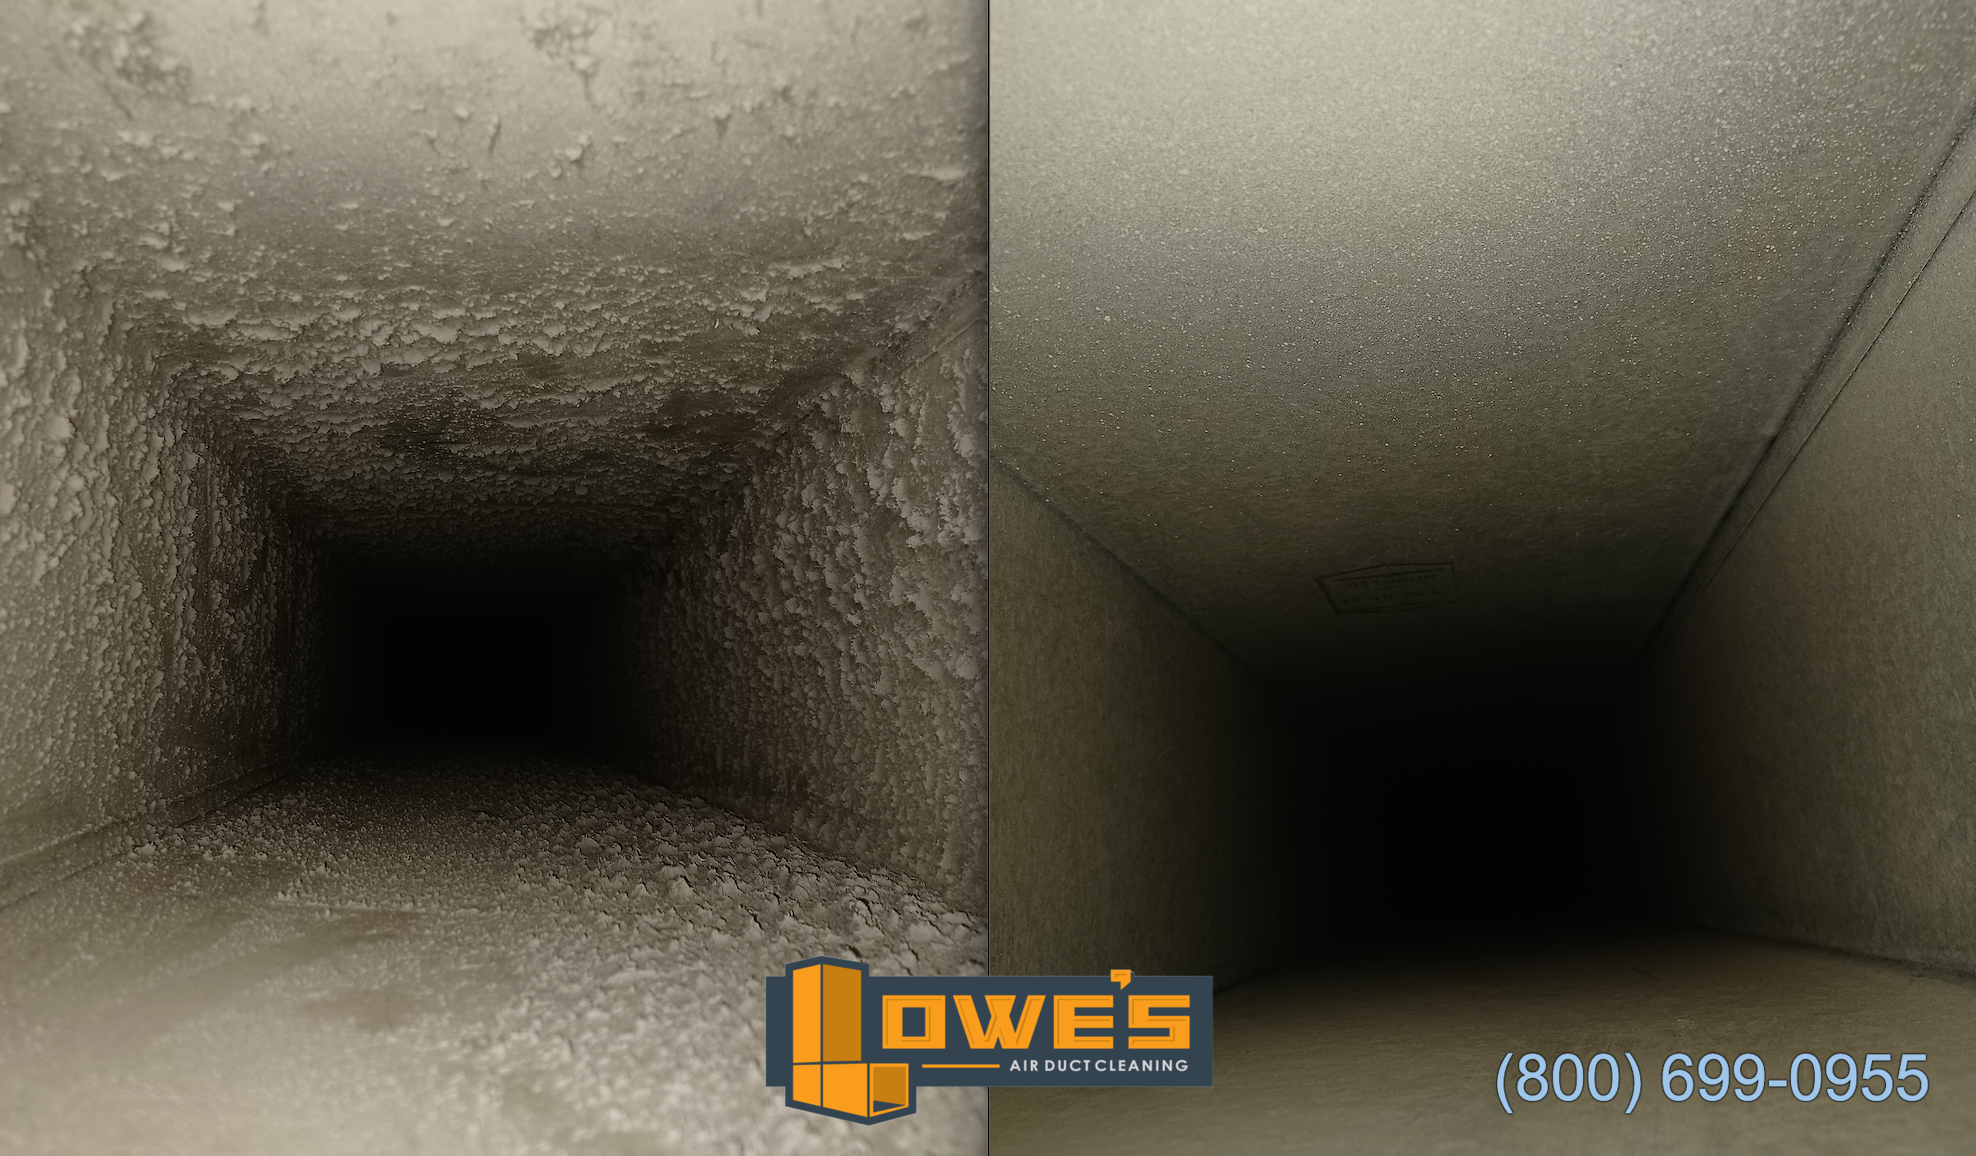 Lowe's Air Duct Cleaning Broomfield (720)372-0001